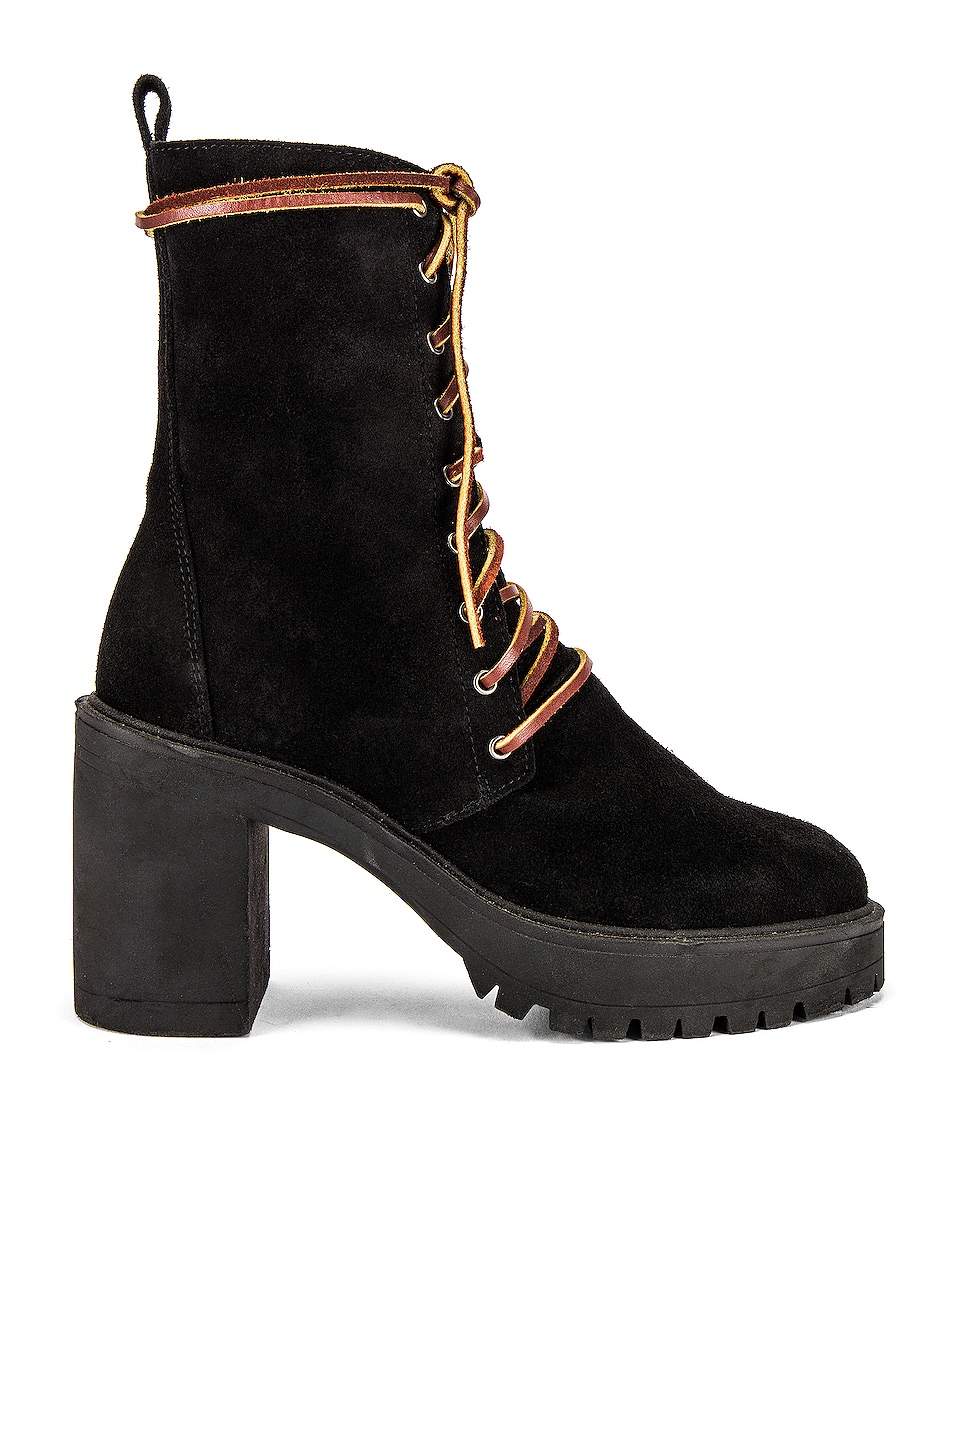 Free People Dylan Lace Up Boot in Black 